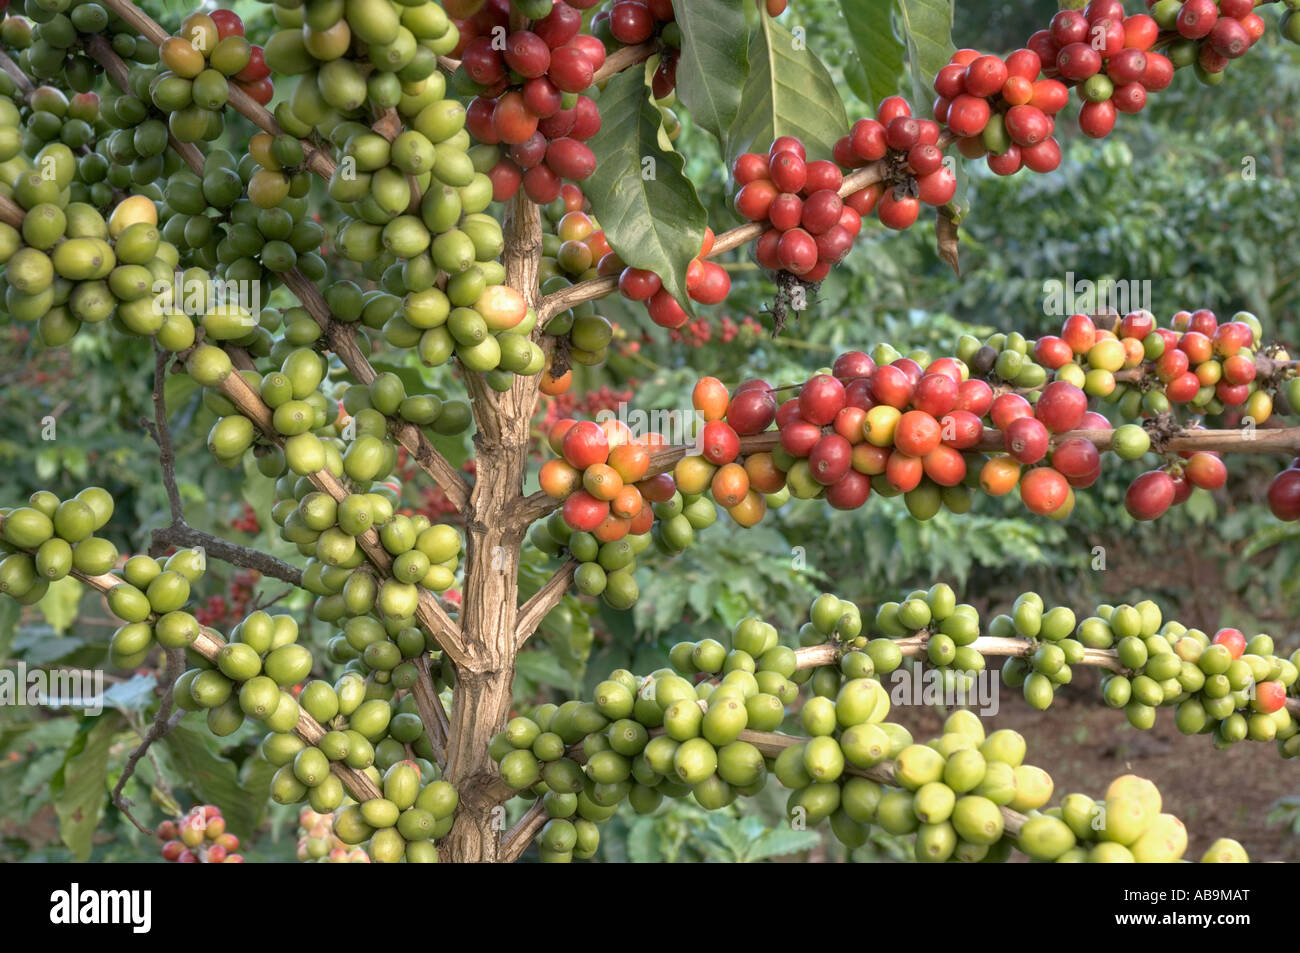 Coffee tree, Coffea arabica, branches with coffee berries, close-up: red berries (ripe) green (immature), Tanzania Stock Photo